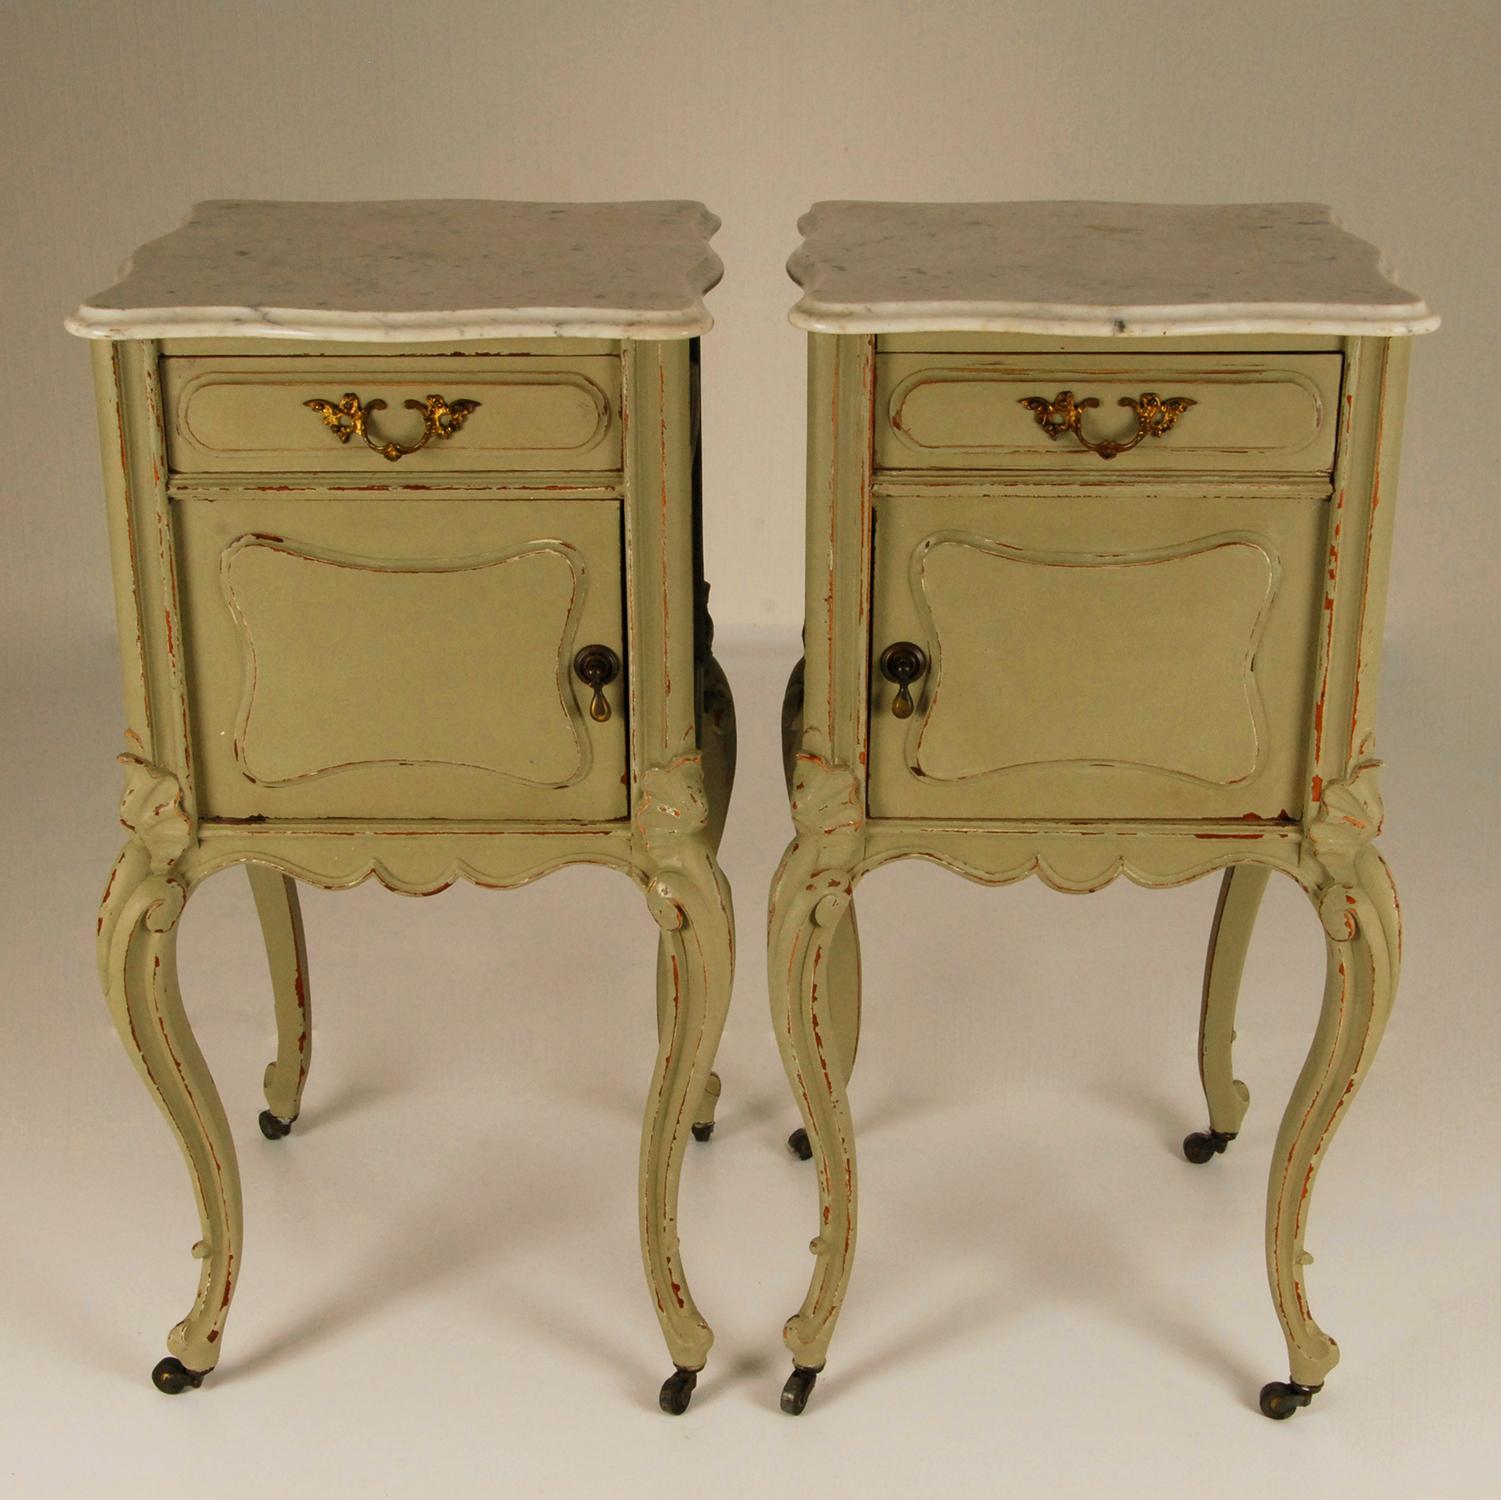 Hand-Carved French Country Rococo Distressed Green and White Marble Top Nightstands, a Pair